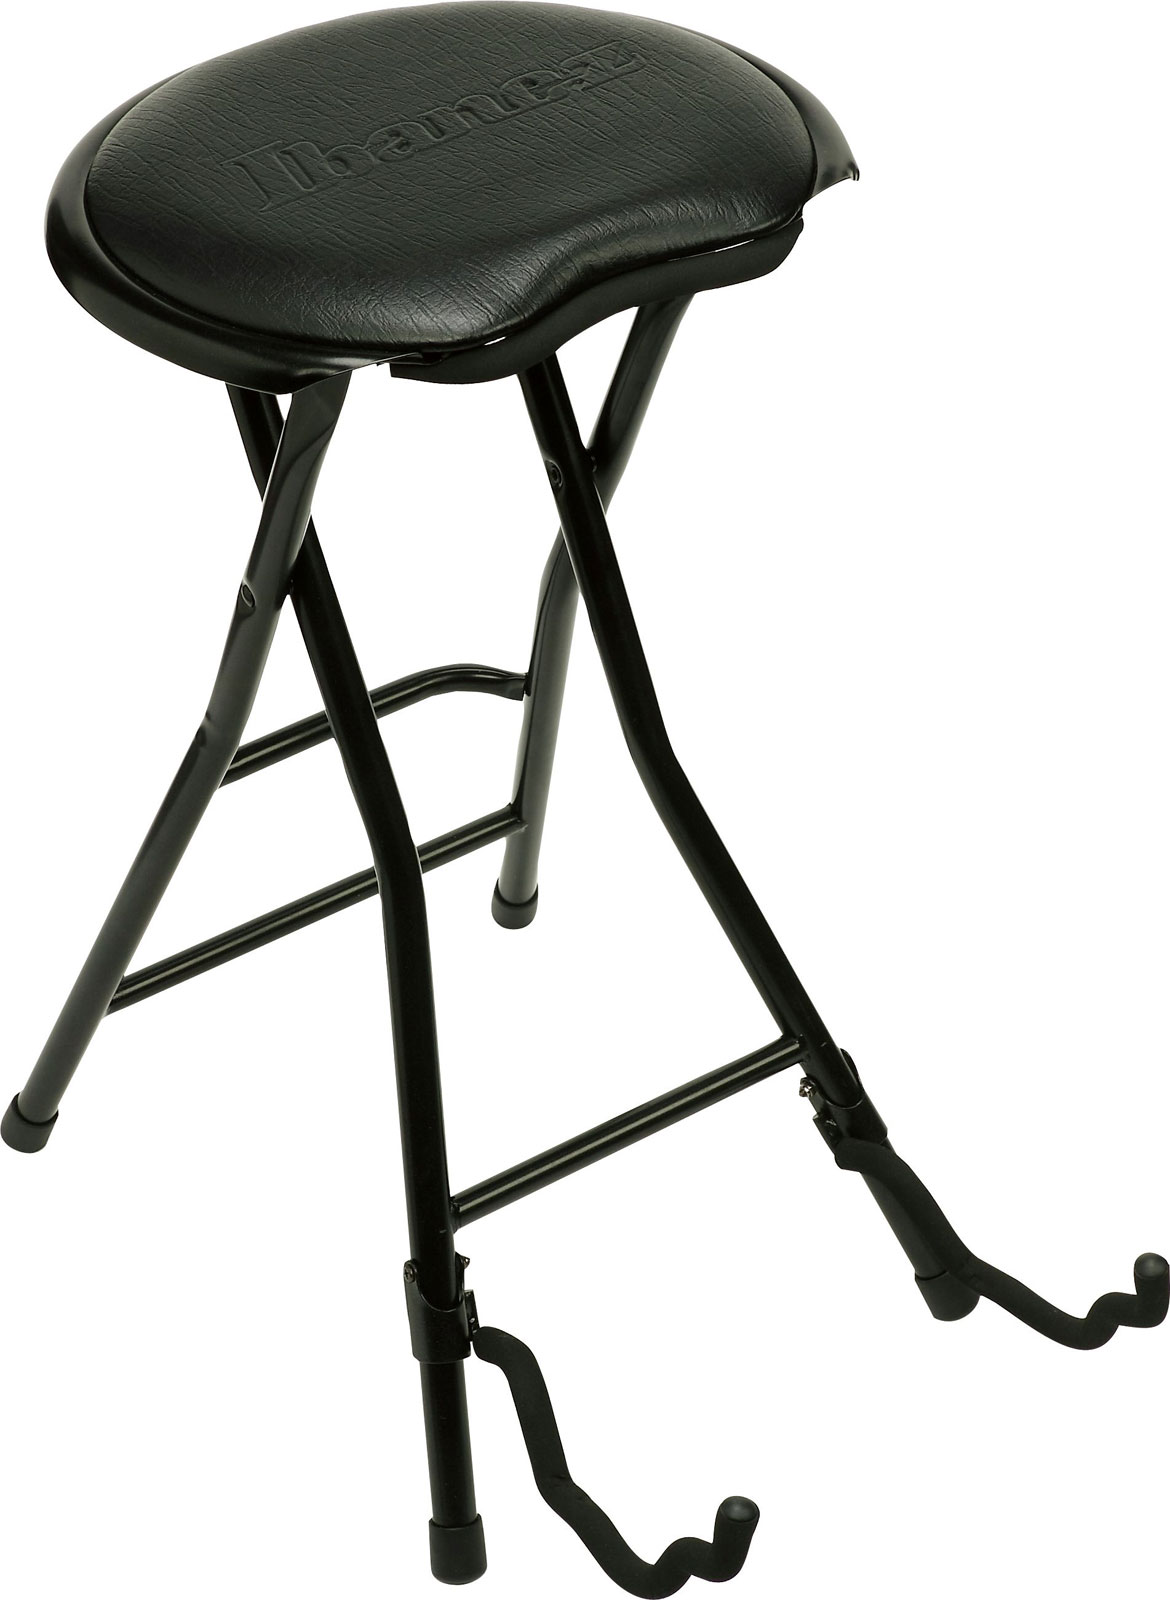 IBANEZ IMC50FS MUSIC STOOL WITH GUITAR STAND